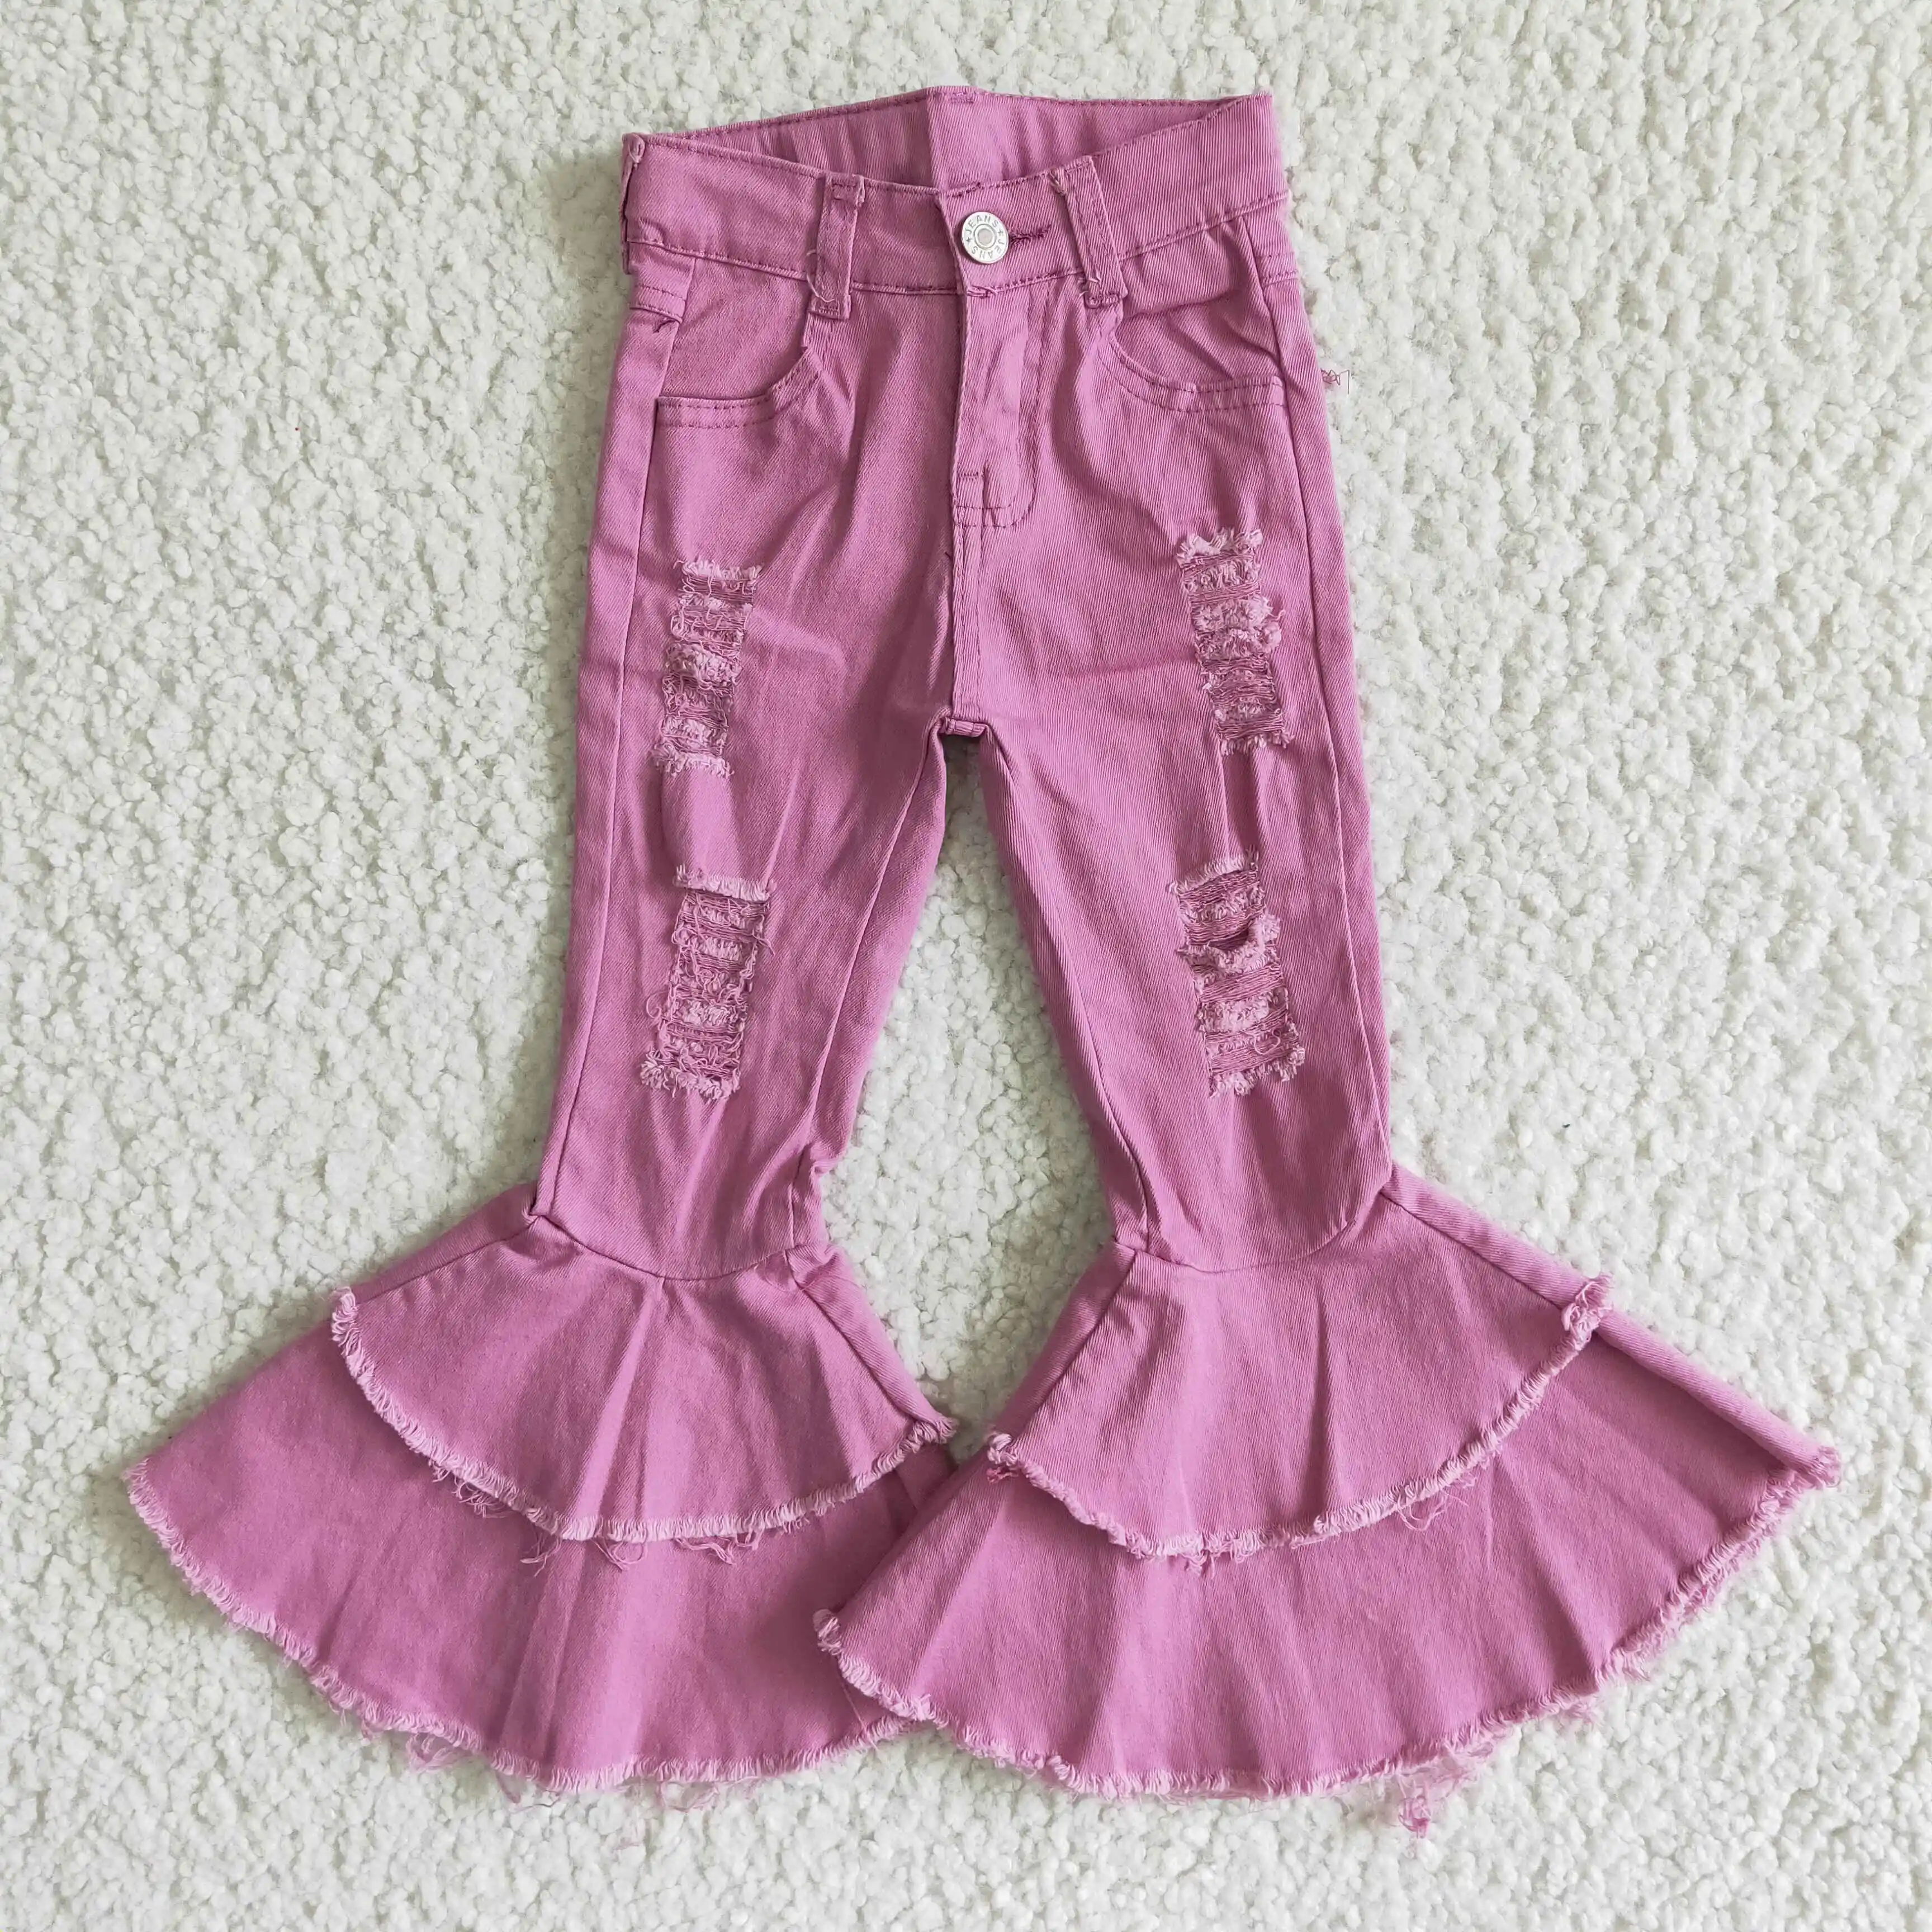 Boutique-fashion-style-baby-girl-jeans-pants-purple-hole-design-flared ...